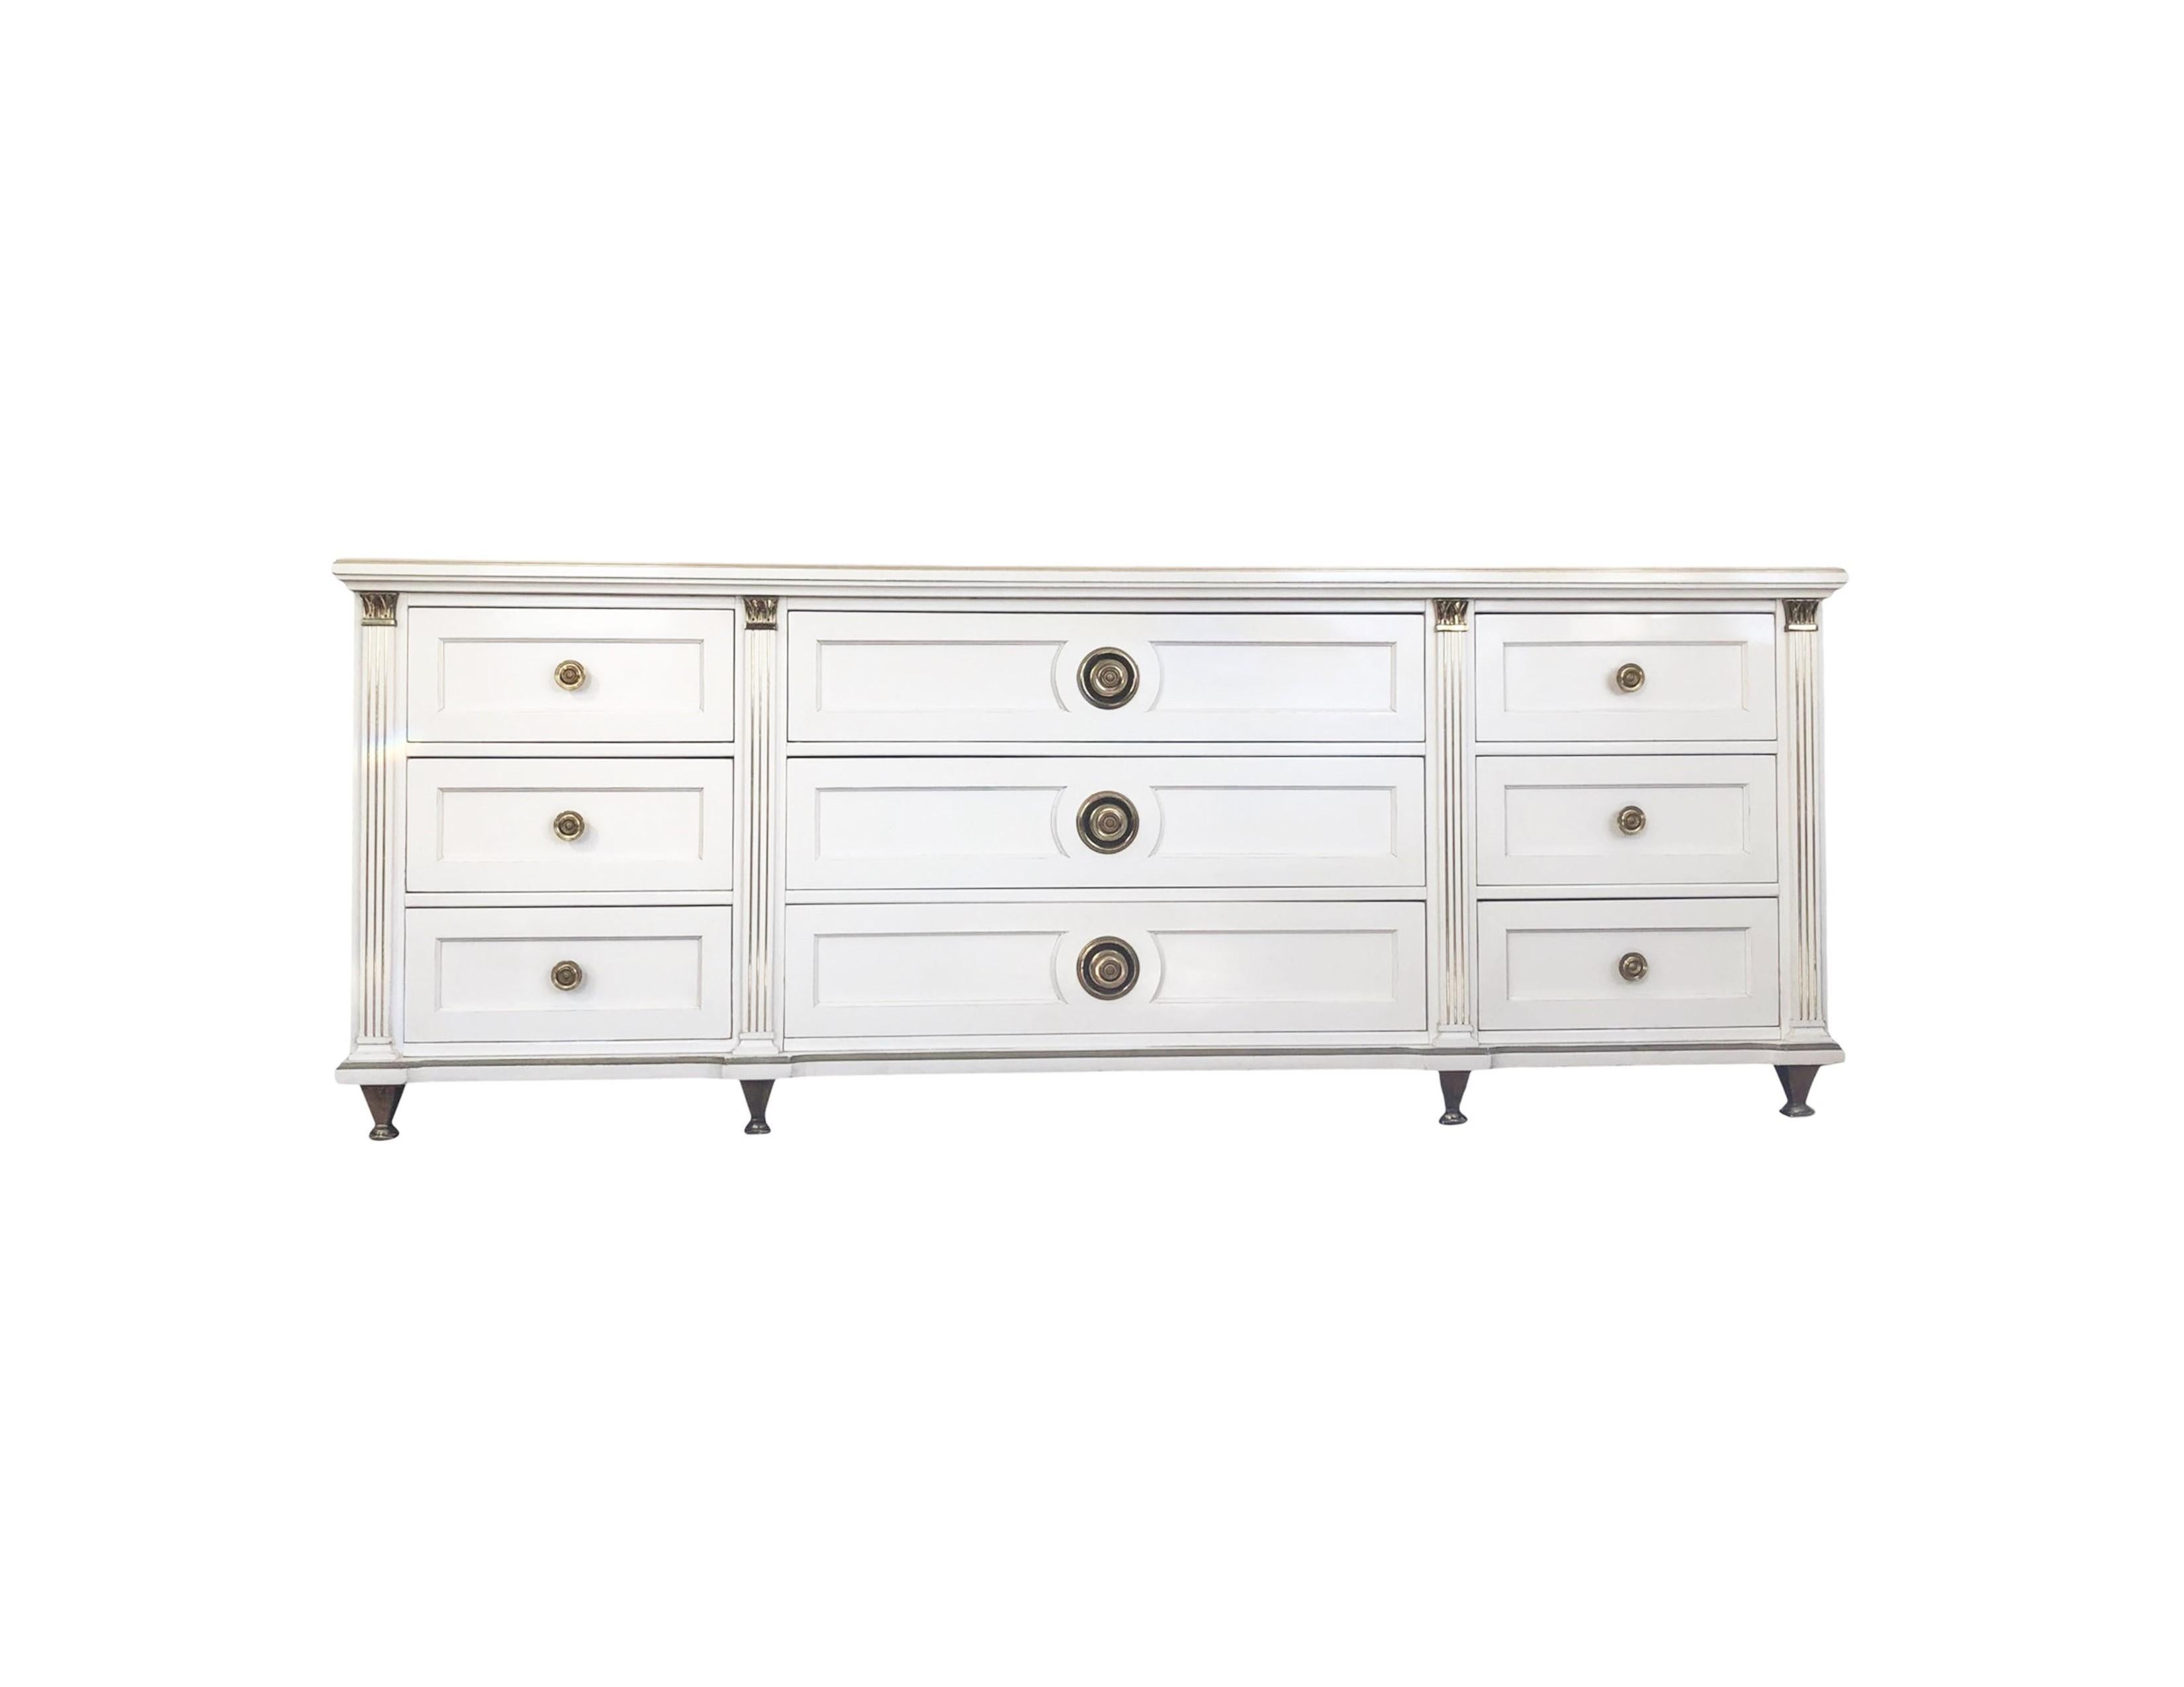 A stunningly sophisticated design from the 1960's, this piece feels like Renzo Rutili but is from a rare series by American of Martinsville. A modern interpretation on refined neoclassic design, this nine-drawer dresser/sideboard has a cool vibe, is